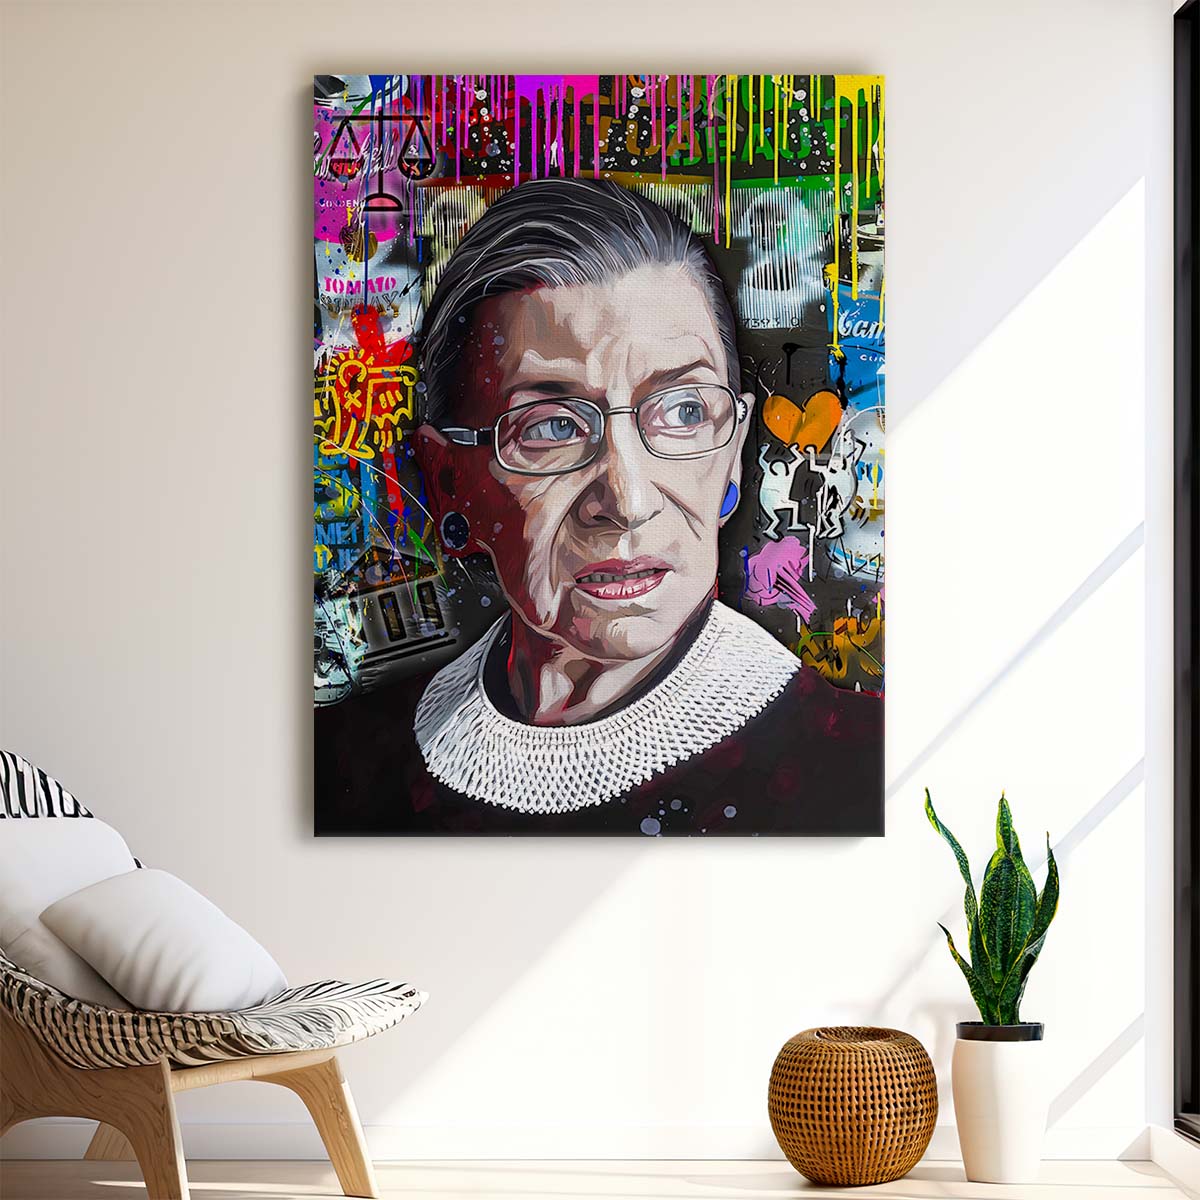 Justice Ruth Bader Ginsburg Portrait Graffiti Wall Art by Luxuriance Designs. Made in USA.